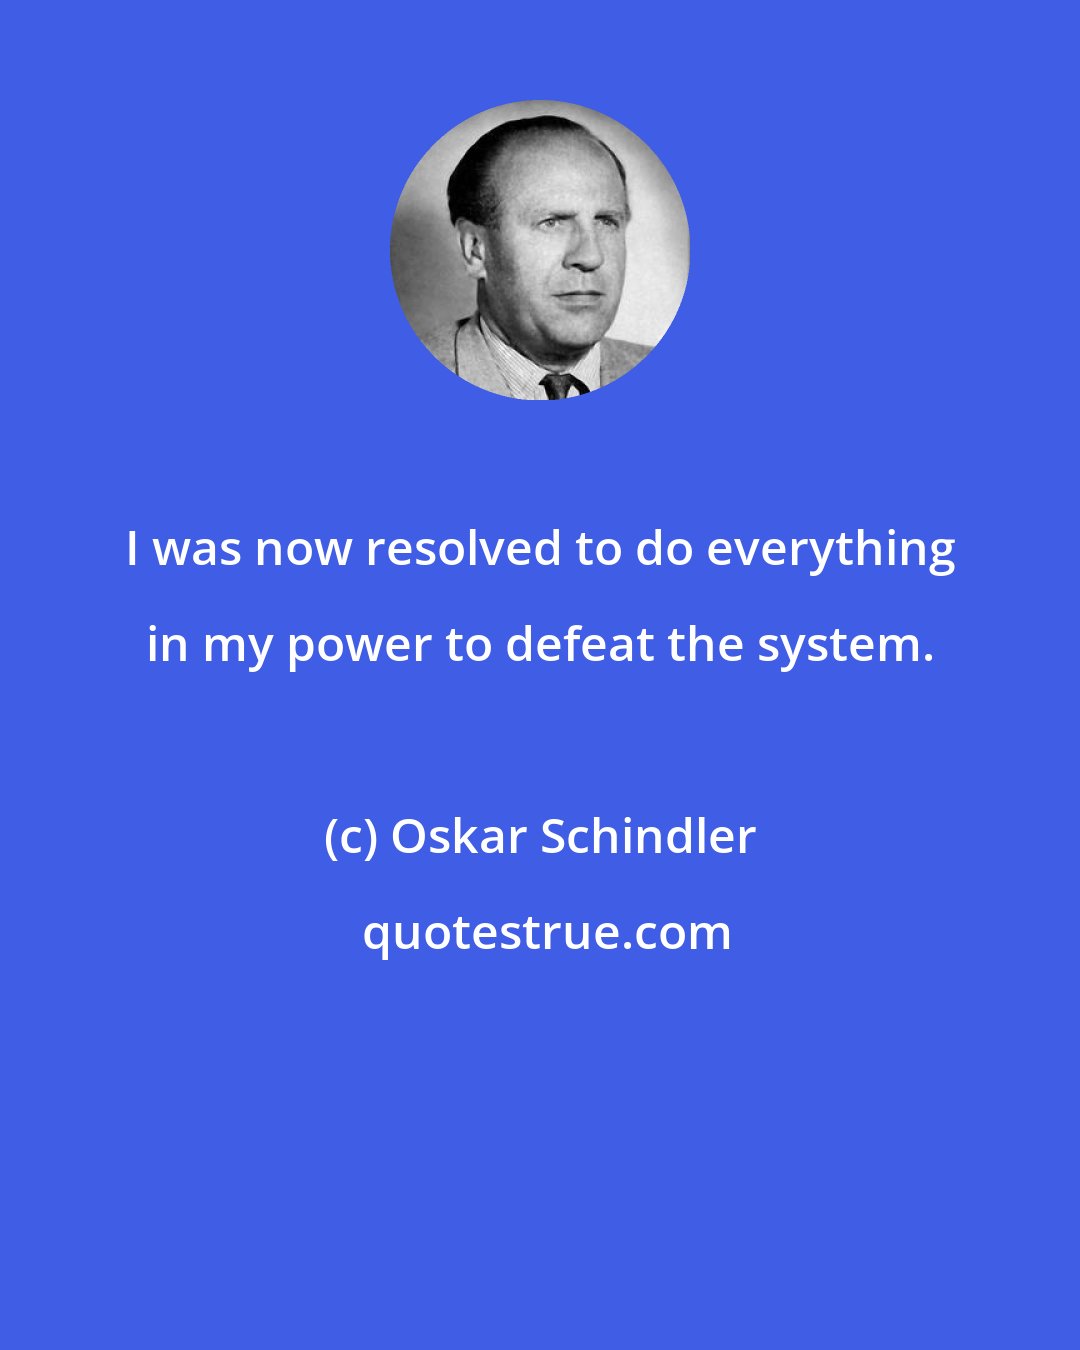 Oskar Schindler: I was now resolved to do everything in my power to defeat the system.